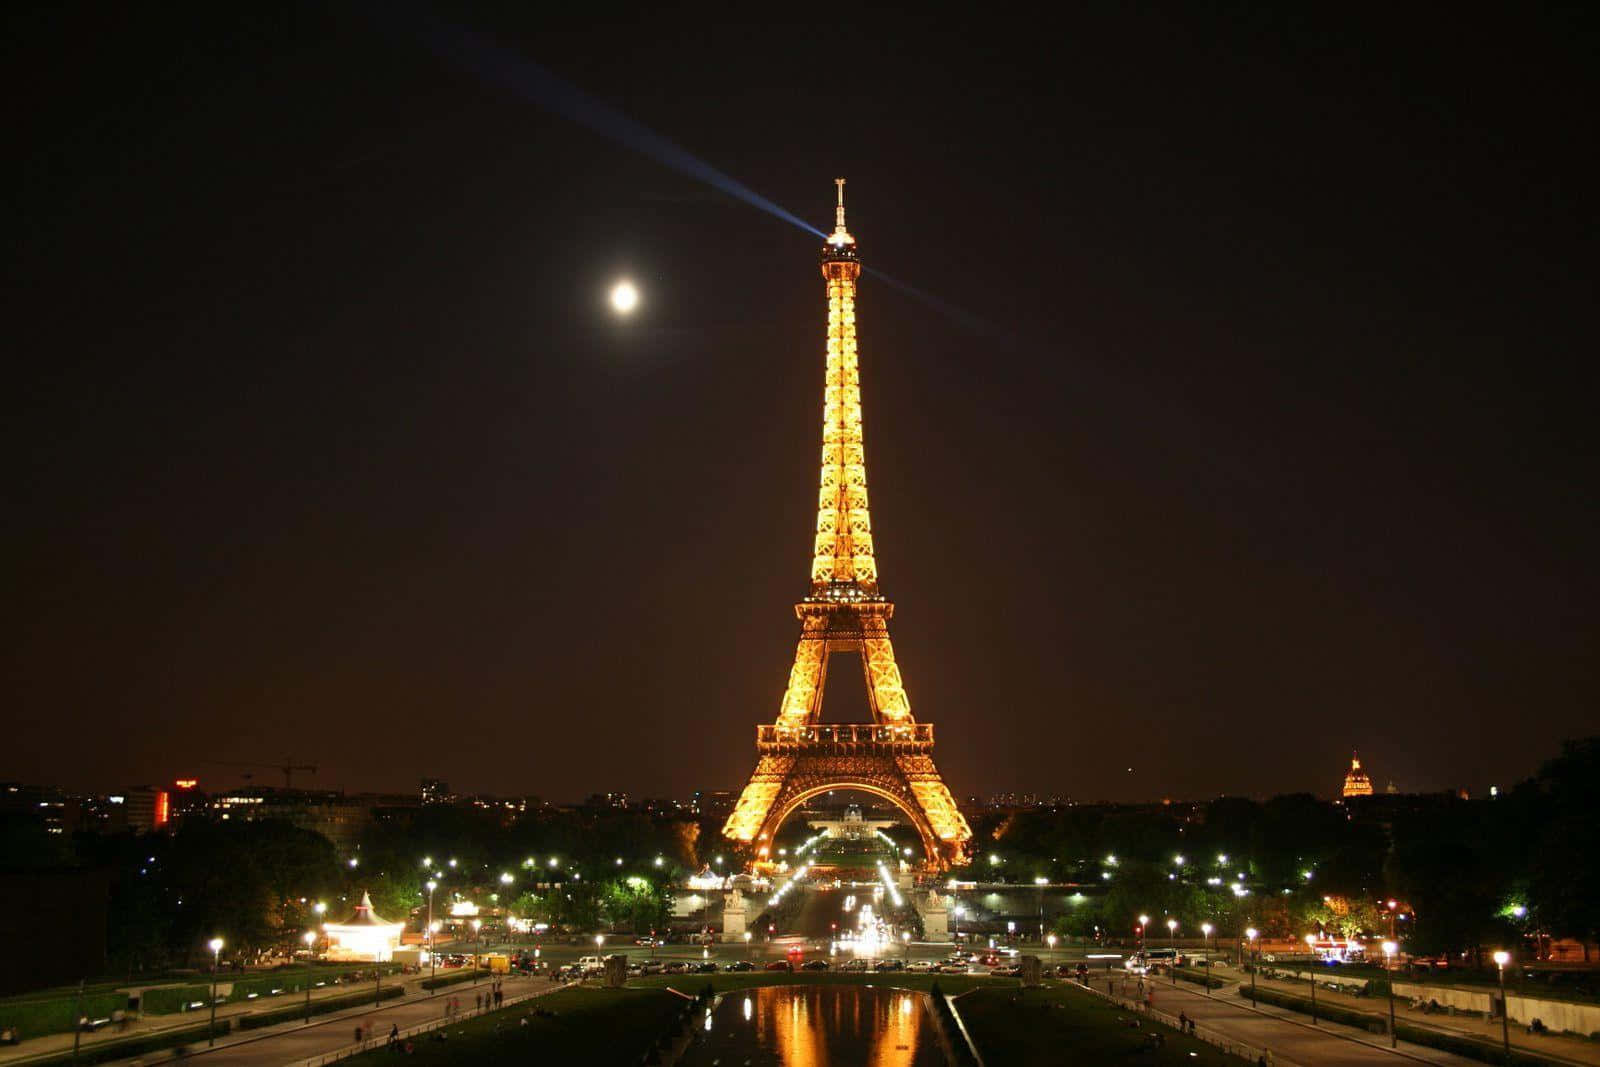 The majestic Eiffel Tower in Paris